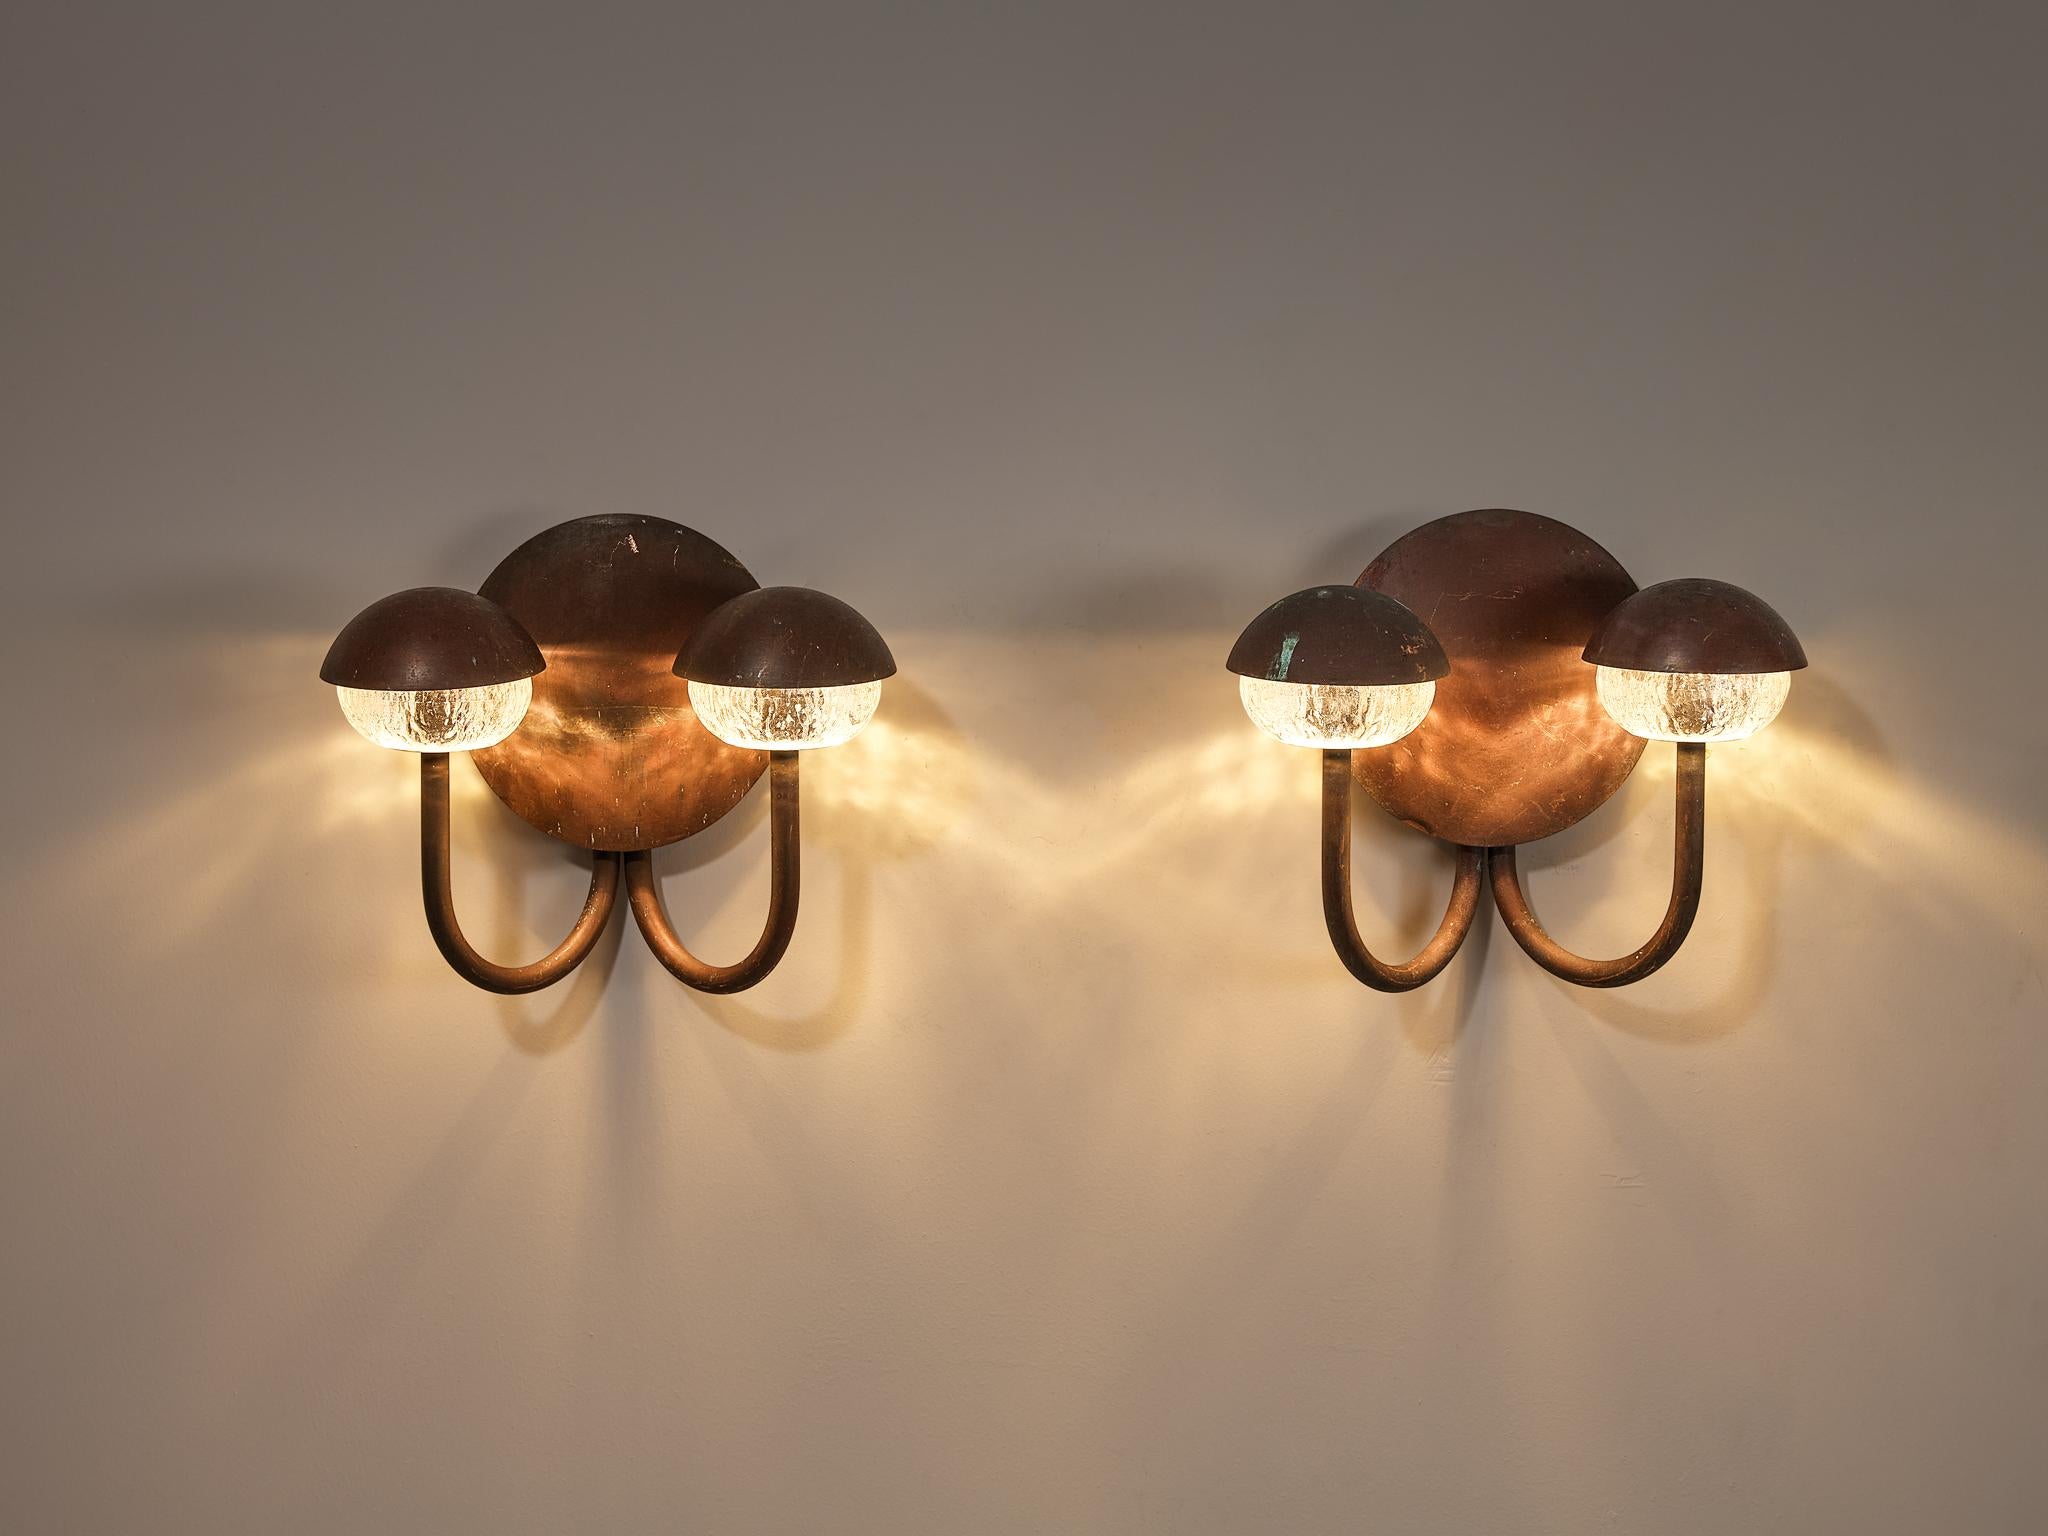 Pair of wall lights, patinated copper, glass, Scandinavia, 1960s

Charming pair of wall lights executed in copper with a ribbed glass shade. The lamp consists of a circular wall plate from which two copper curved arms with the textured light bulbs